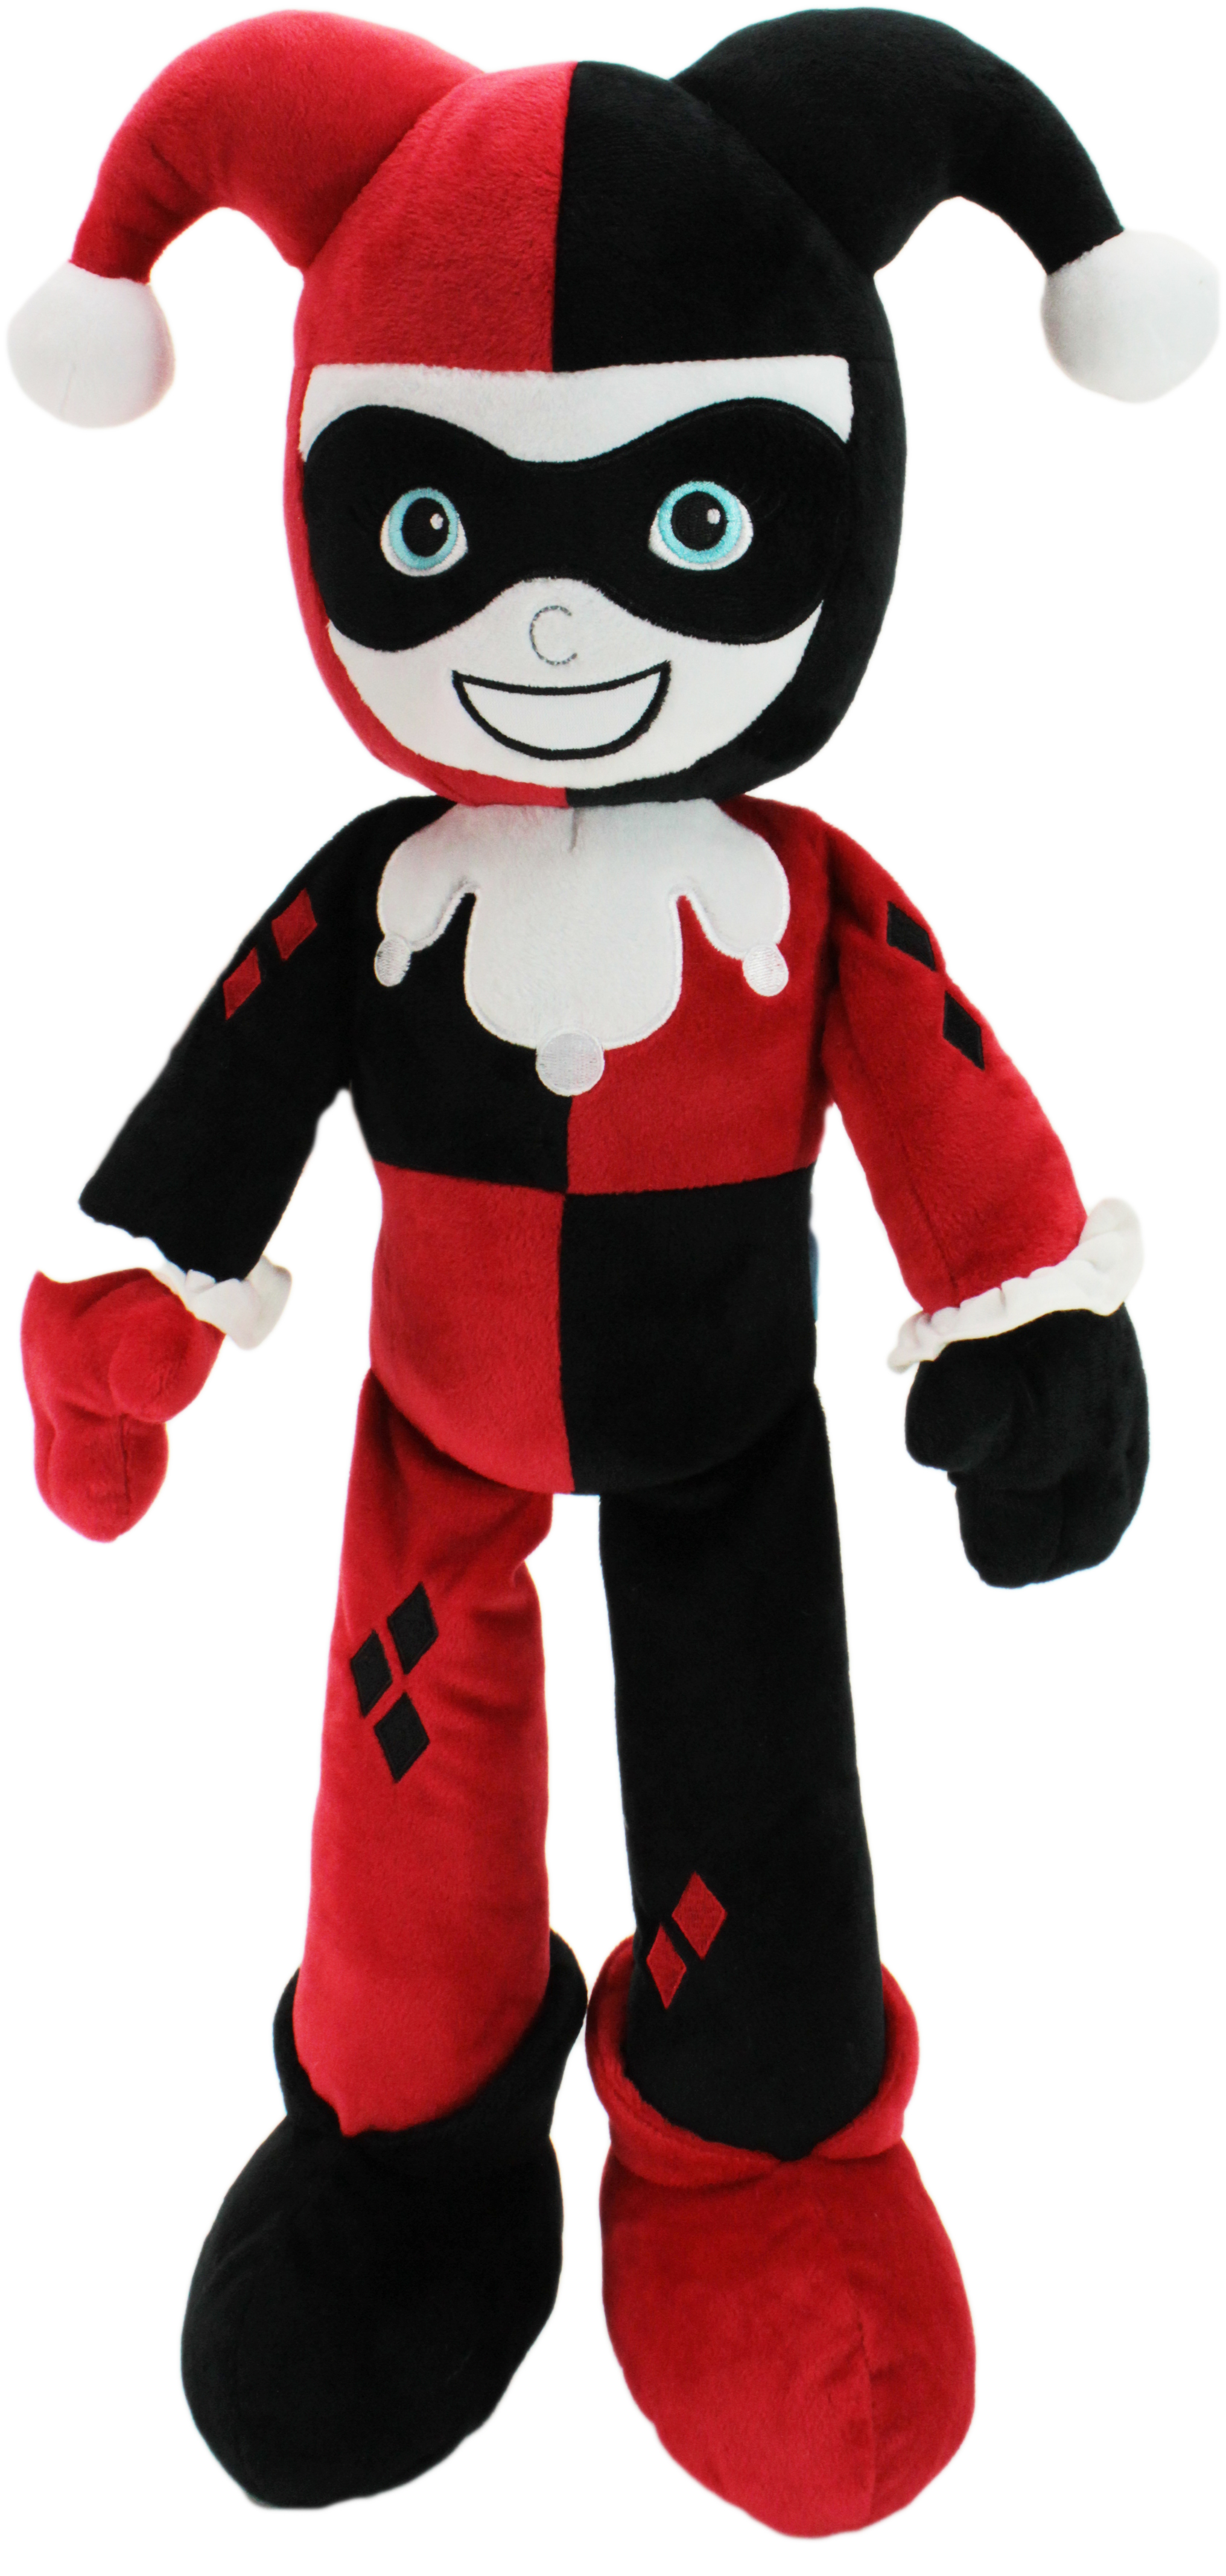 Justice League Harley Quinn Plush Character - image 2 of 4